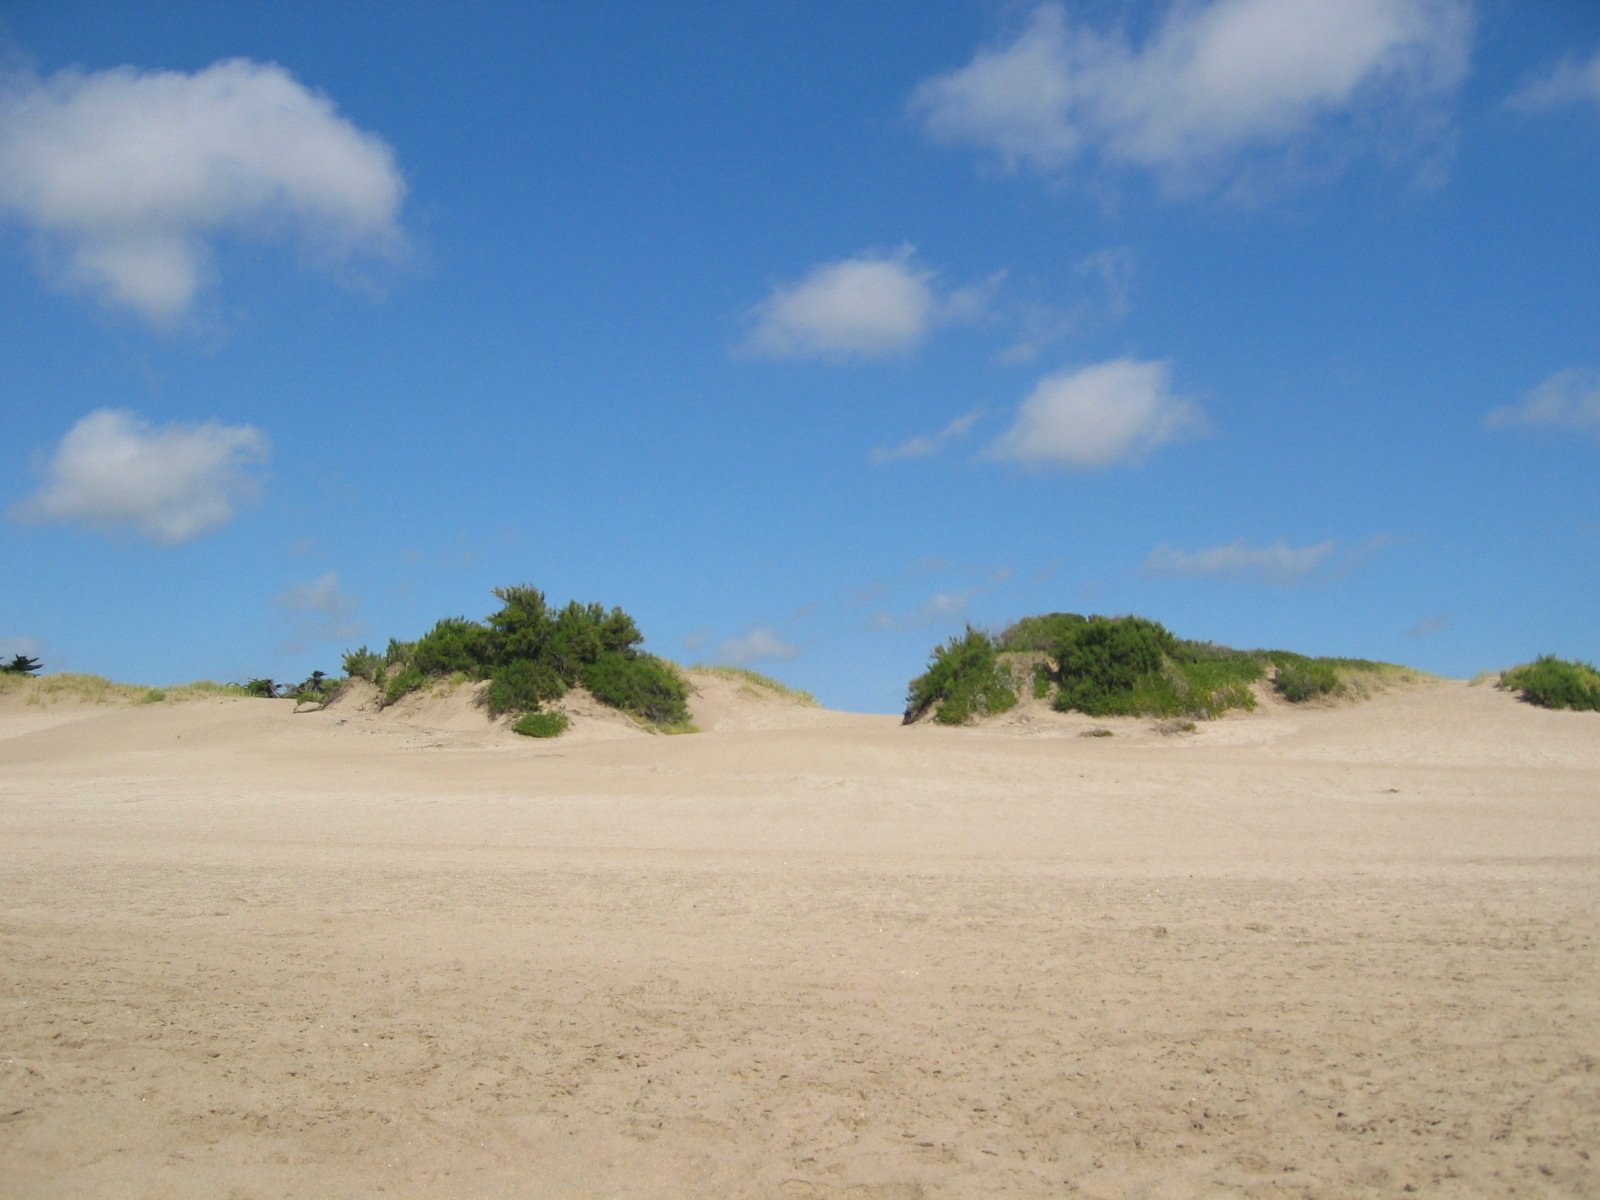 a single tree in the sand near bushes